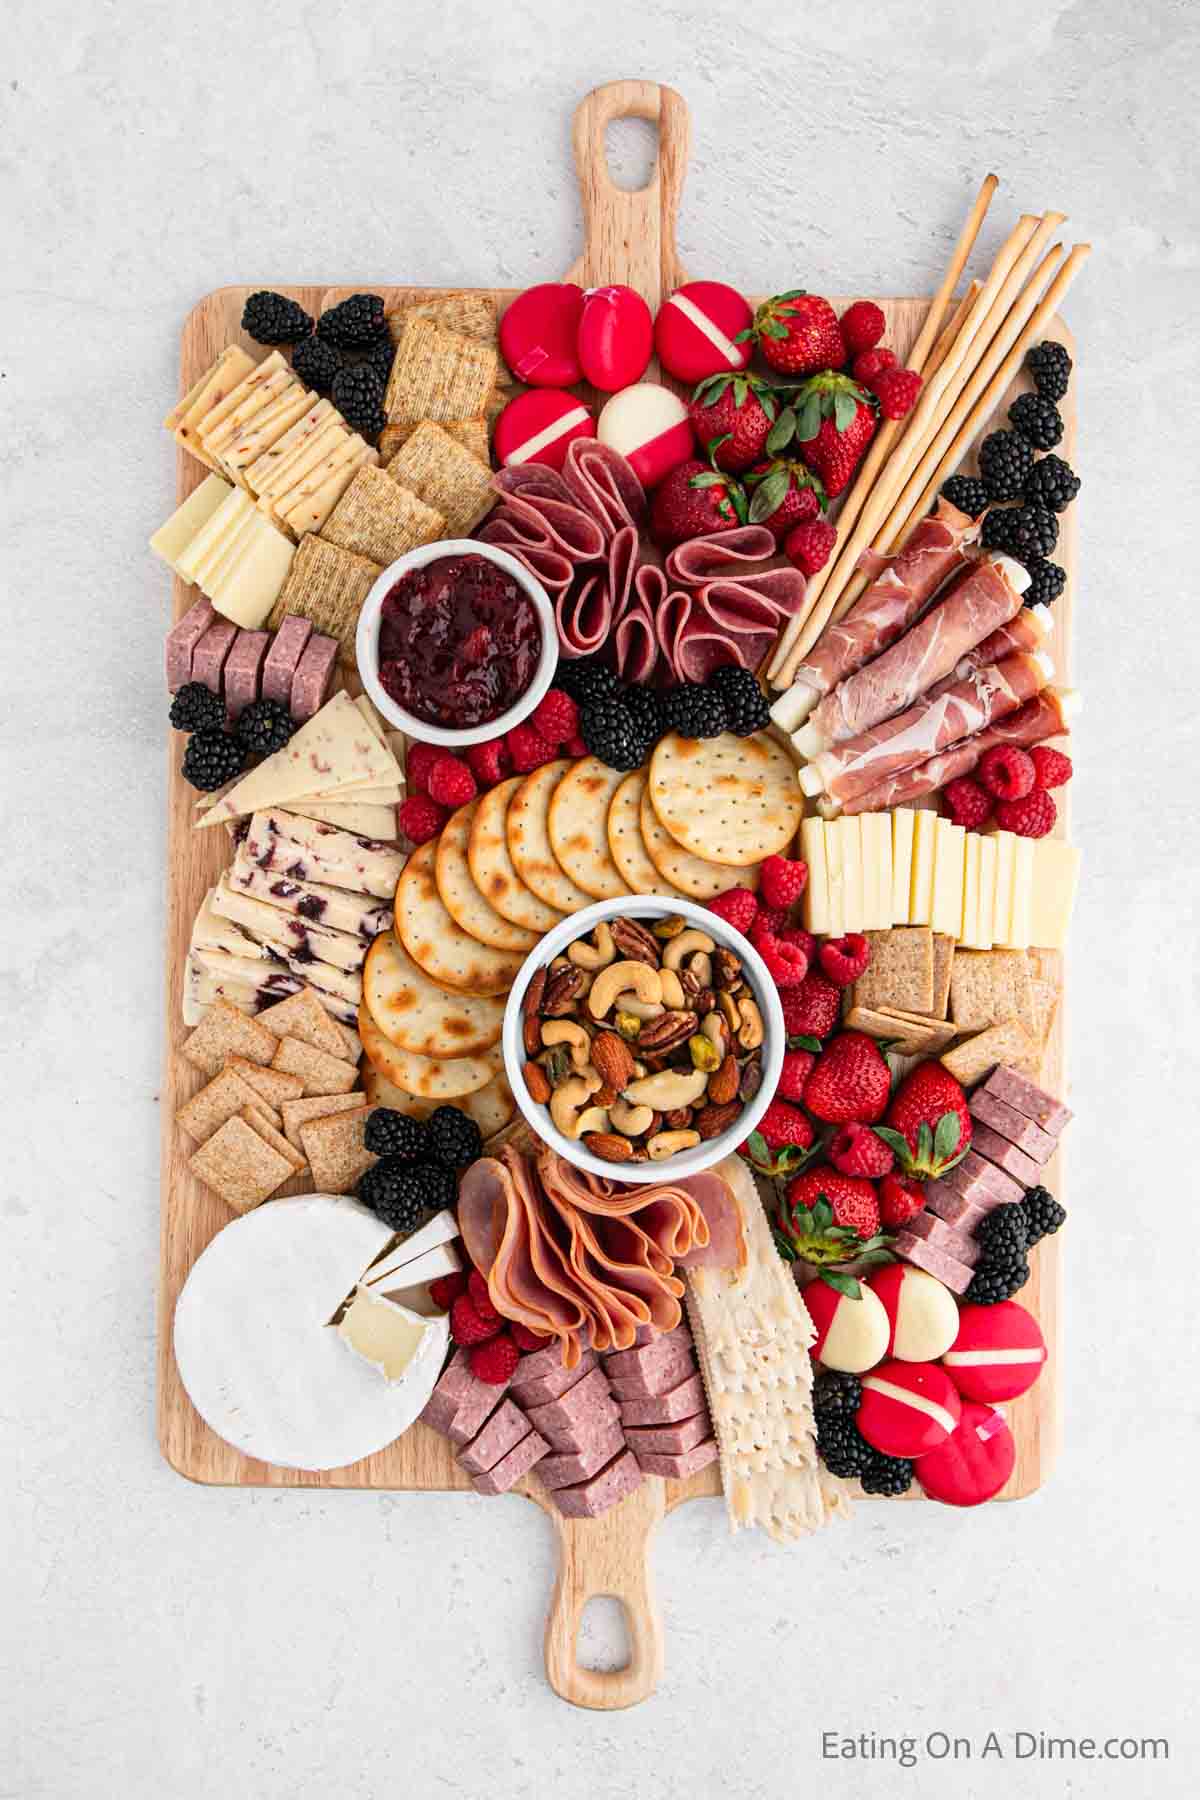 Placing nuts, crackers, cheese, meats on the board